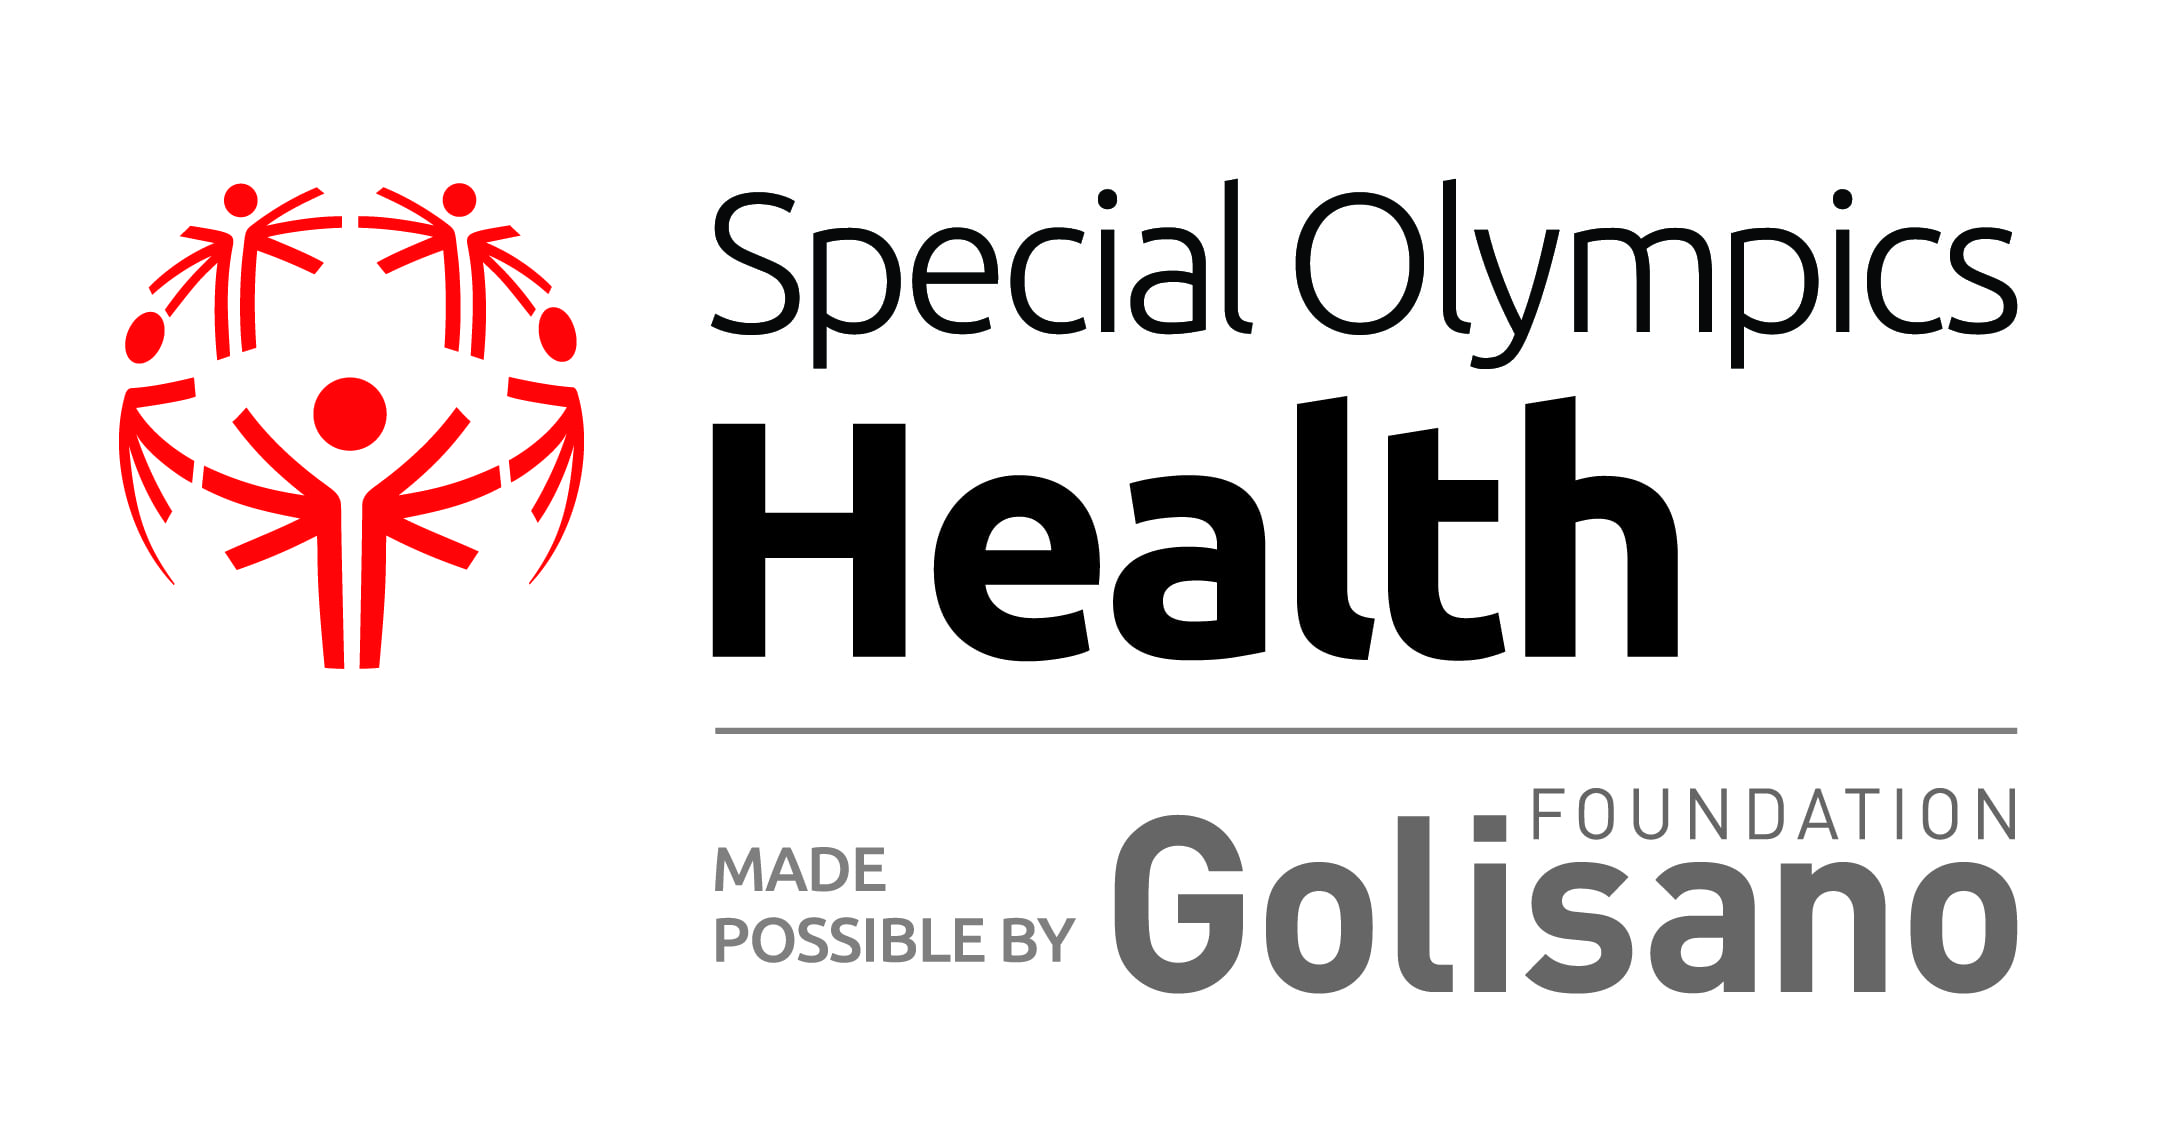 Special Olympics Health Made Possible by Golisano Foundation logo